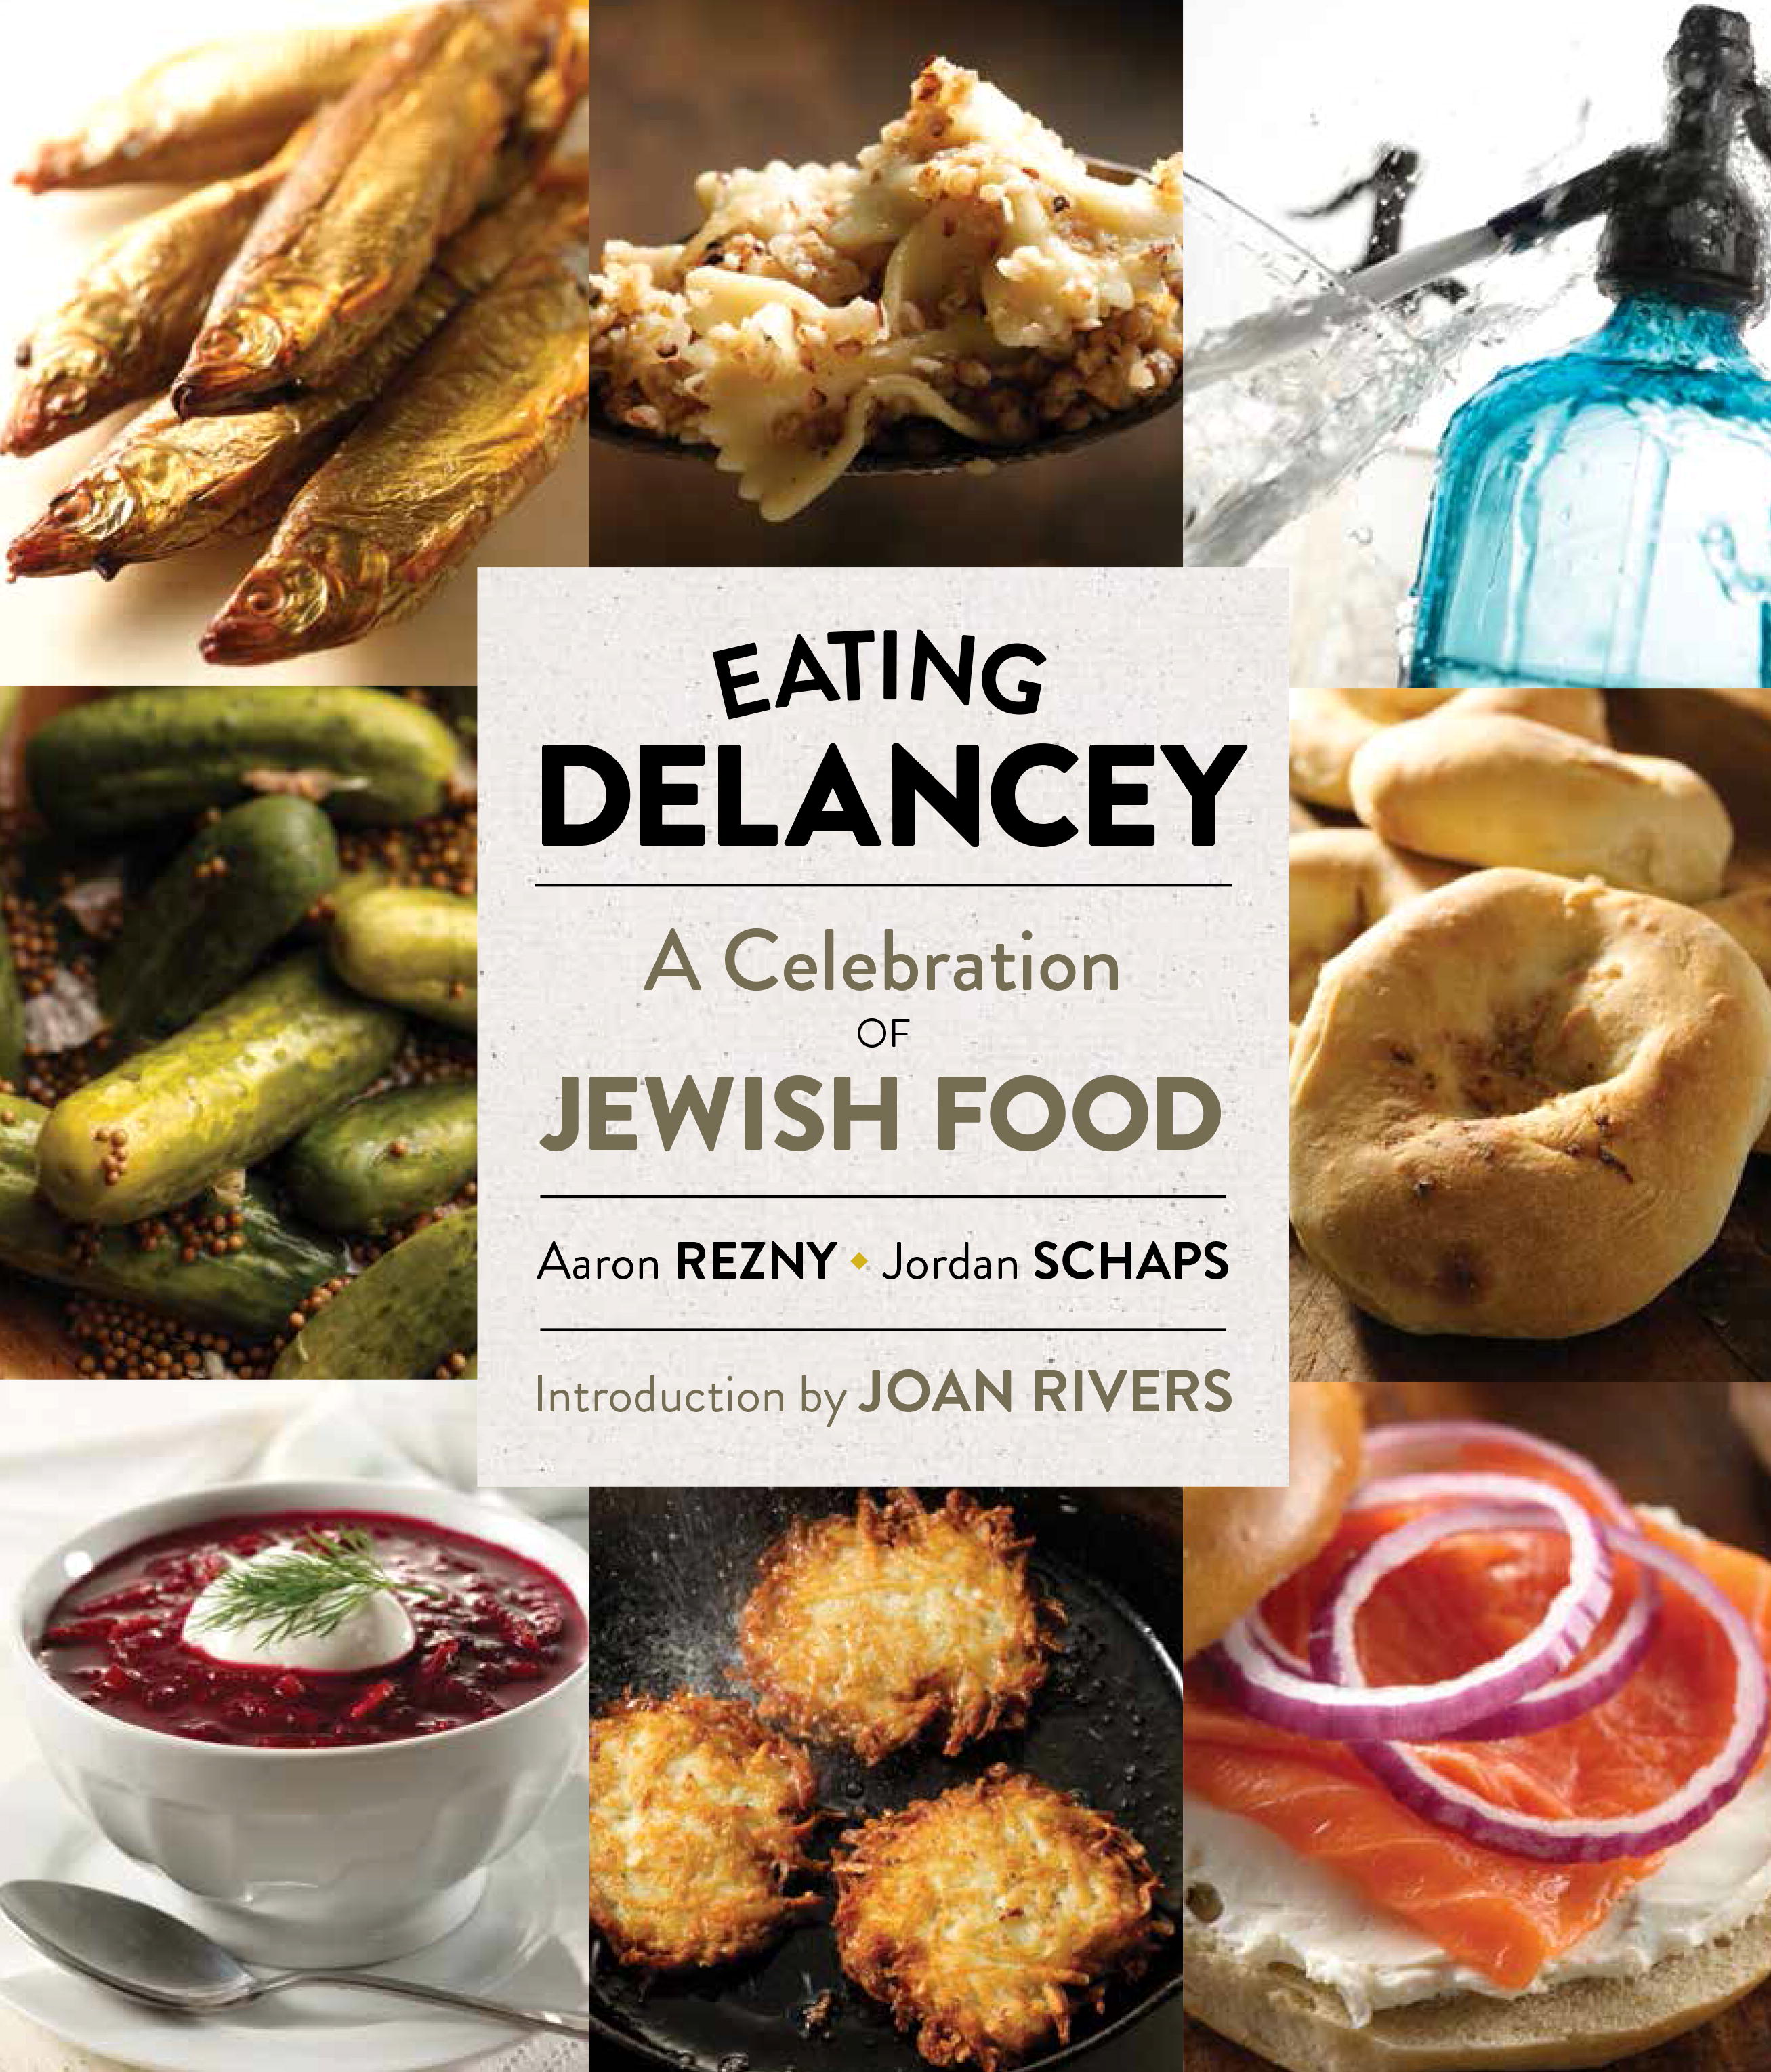 powerHouse Launch of Eating Delancey: A Celebration of Jewish Food by Aaron Rezny & Jordan Schaps